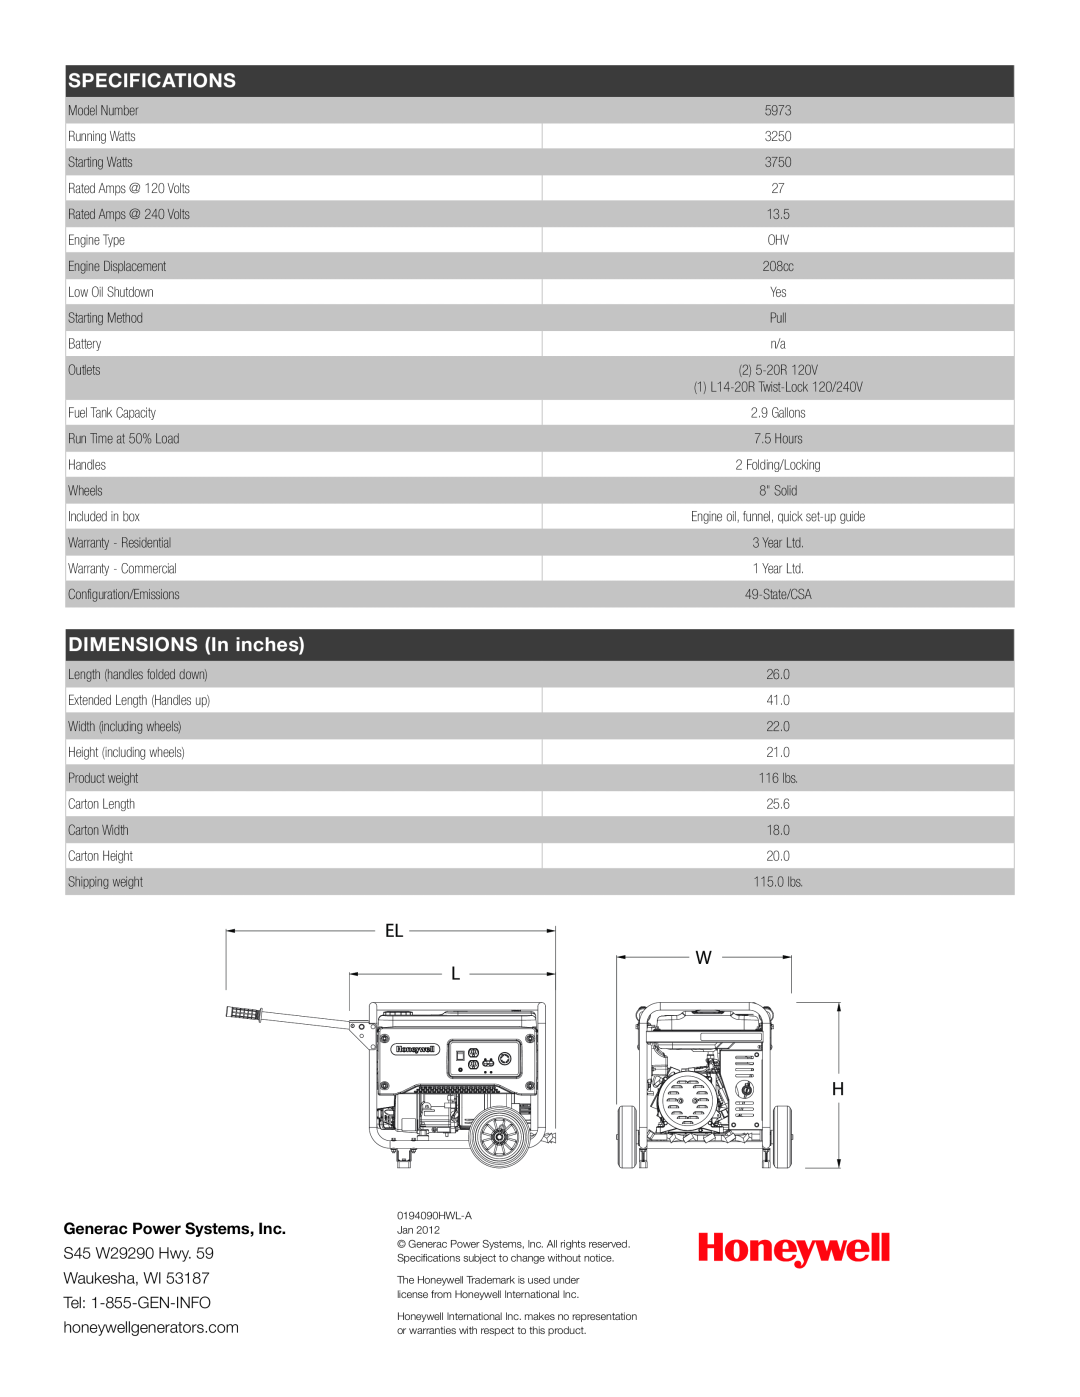 Honeywell 5973R manual El L, Specifications, DIMENSIONS In inches, Generac Power Systems, Inc 